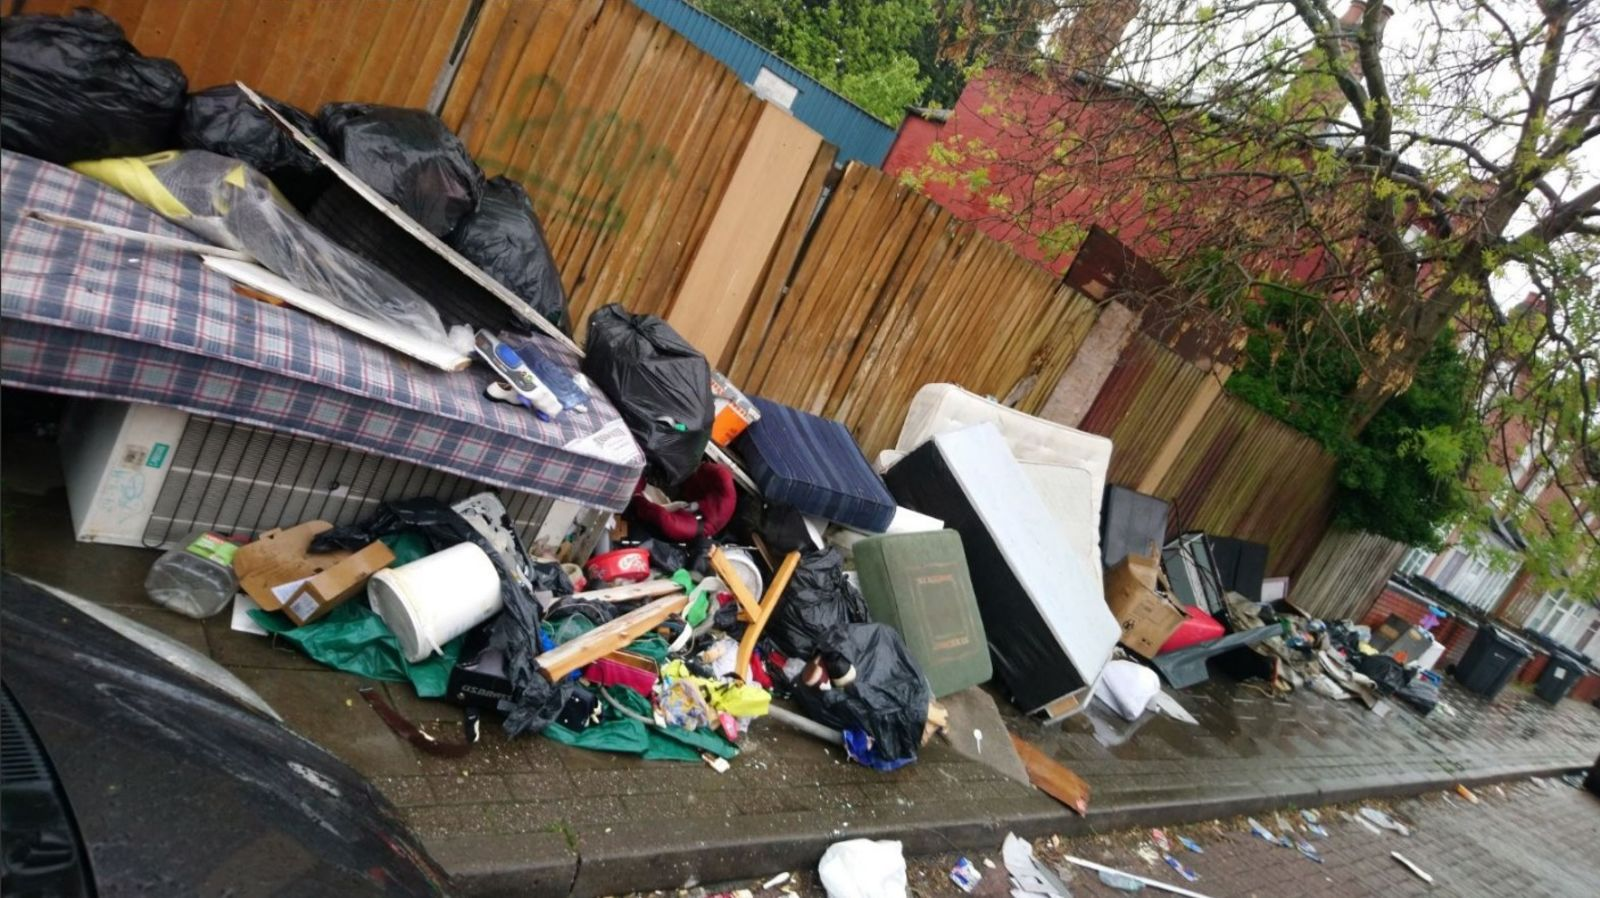 Rubbish Collection in Swale, Medway, Maidstone, Canterbury: Bryson Rubbish Clearance